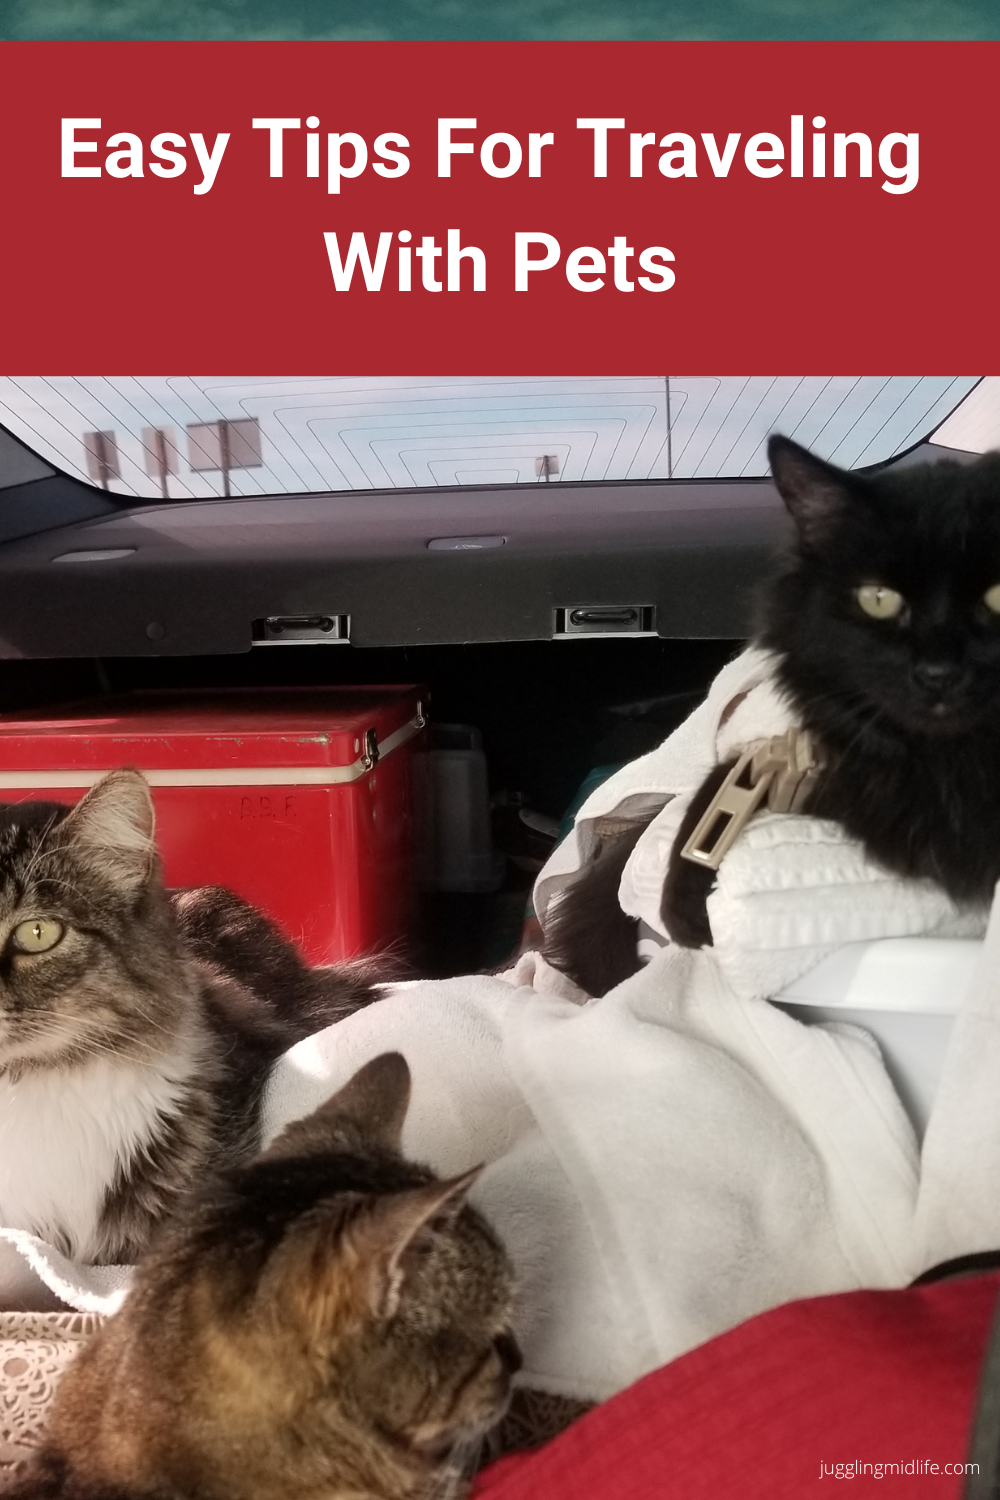 Easy Tips For Traveling with Pets